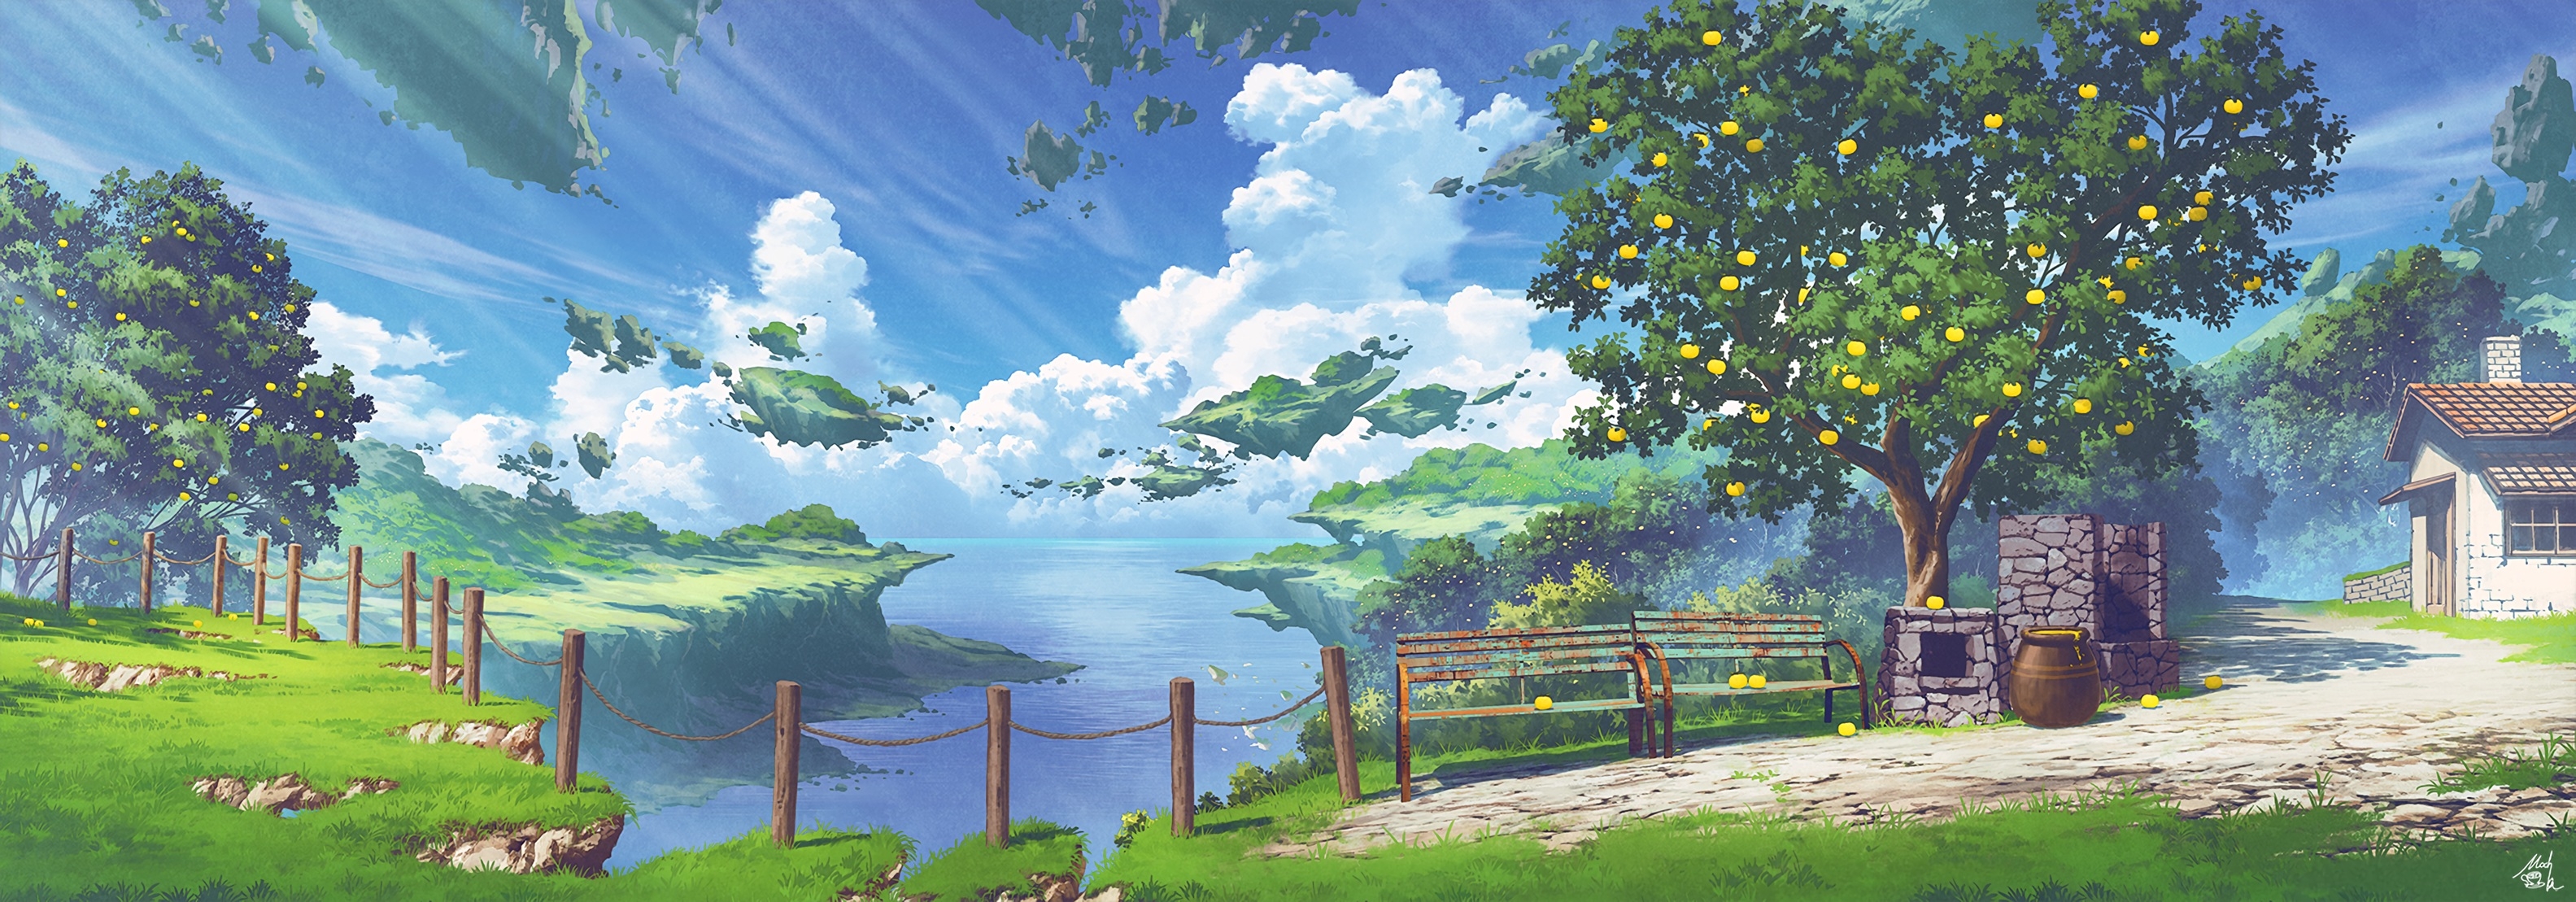 Anime 3167x1109 anime landscape nature sky clouds trees bench